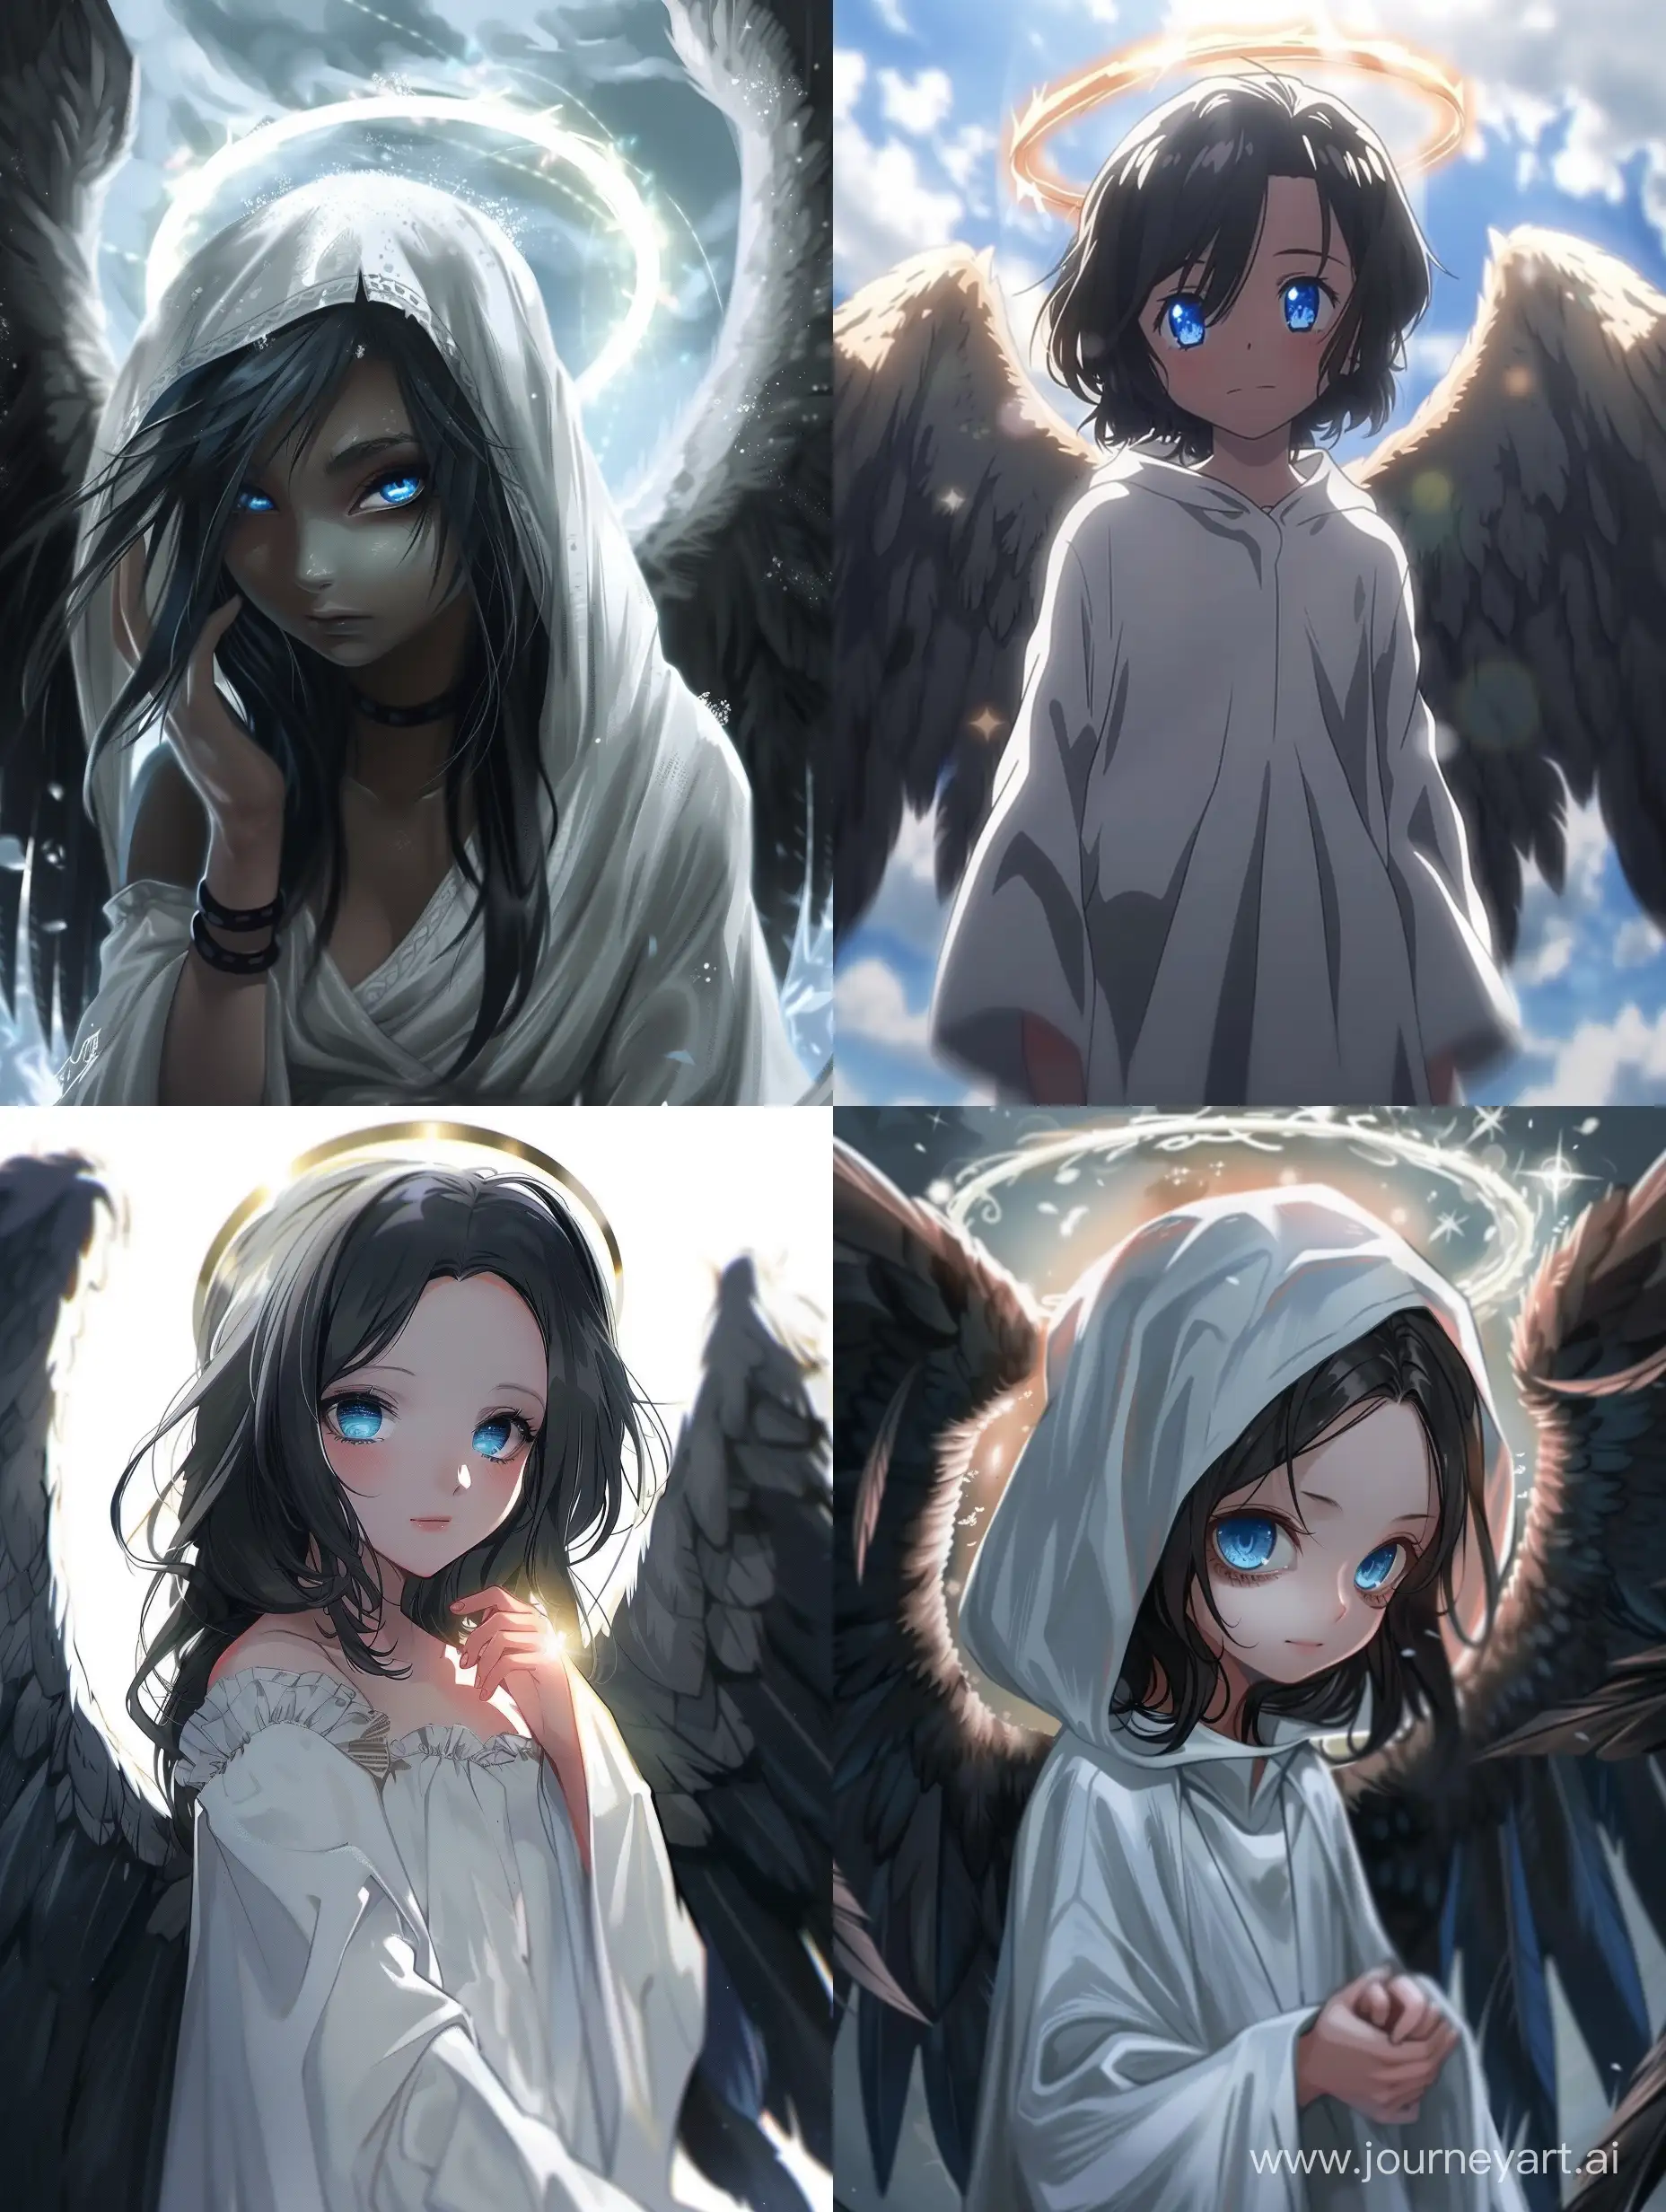 Anime-Rebel-Angel-Girl-with-Black-Wings-and-Halo